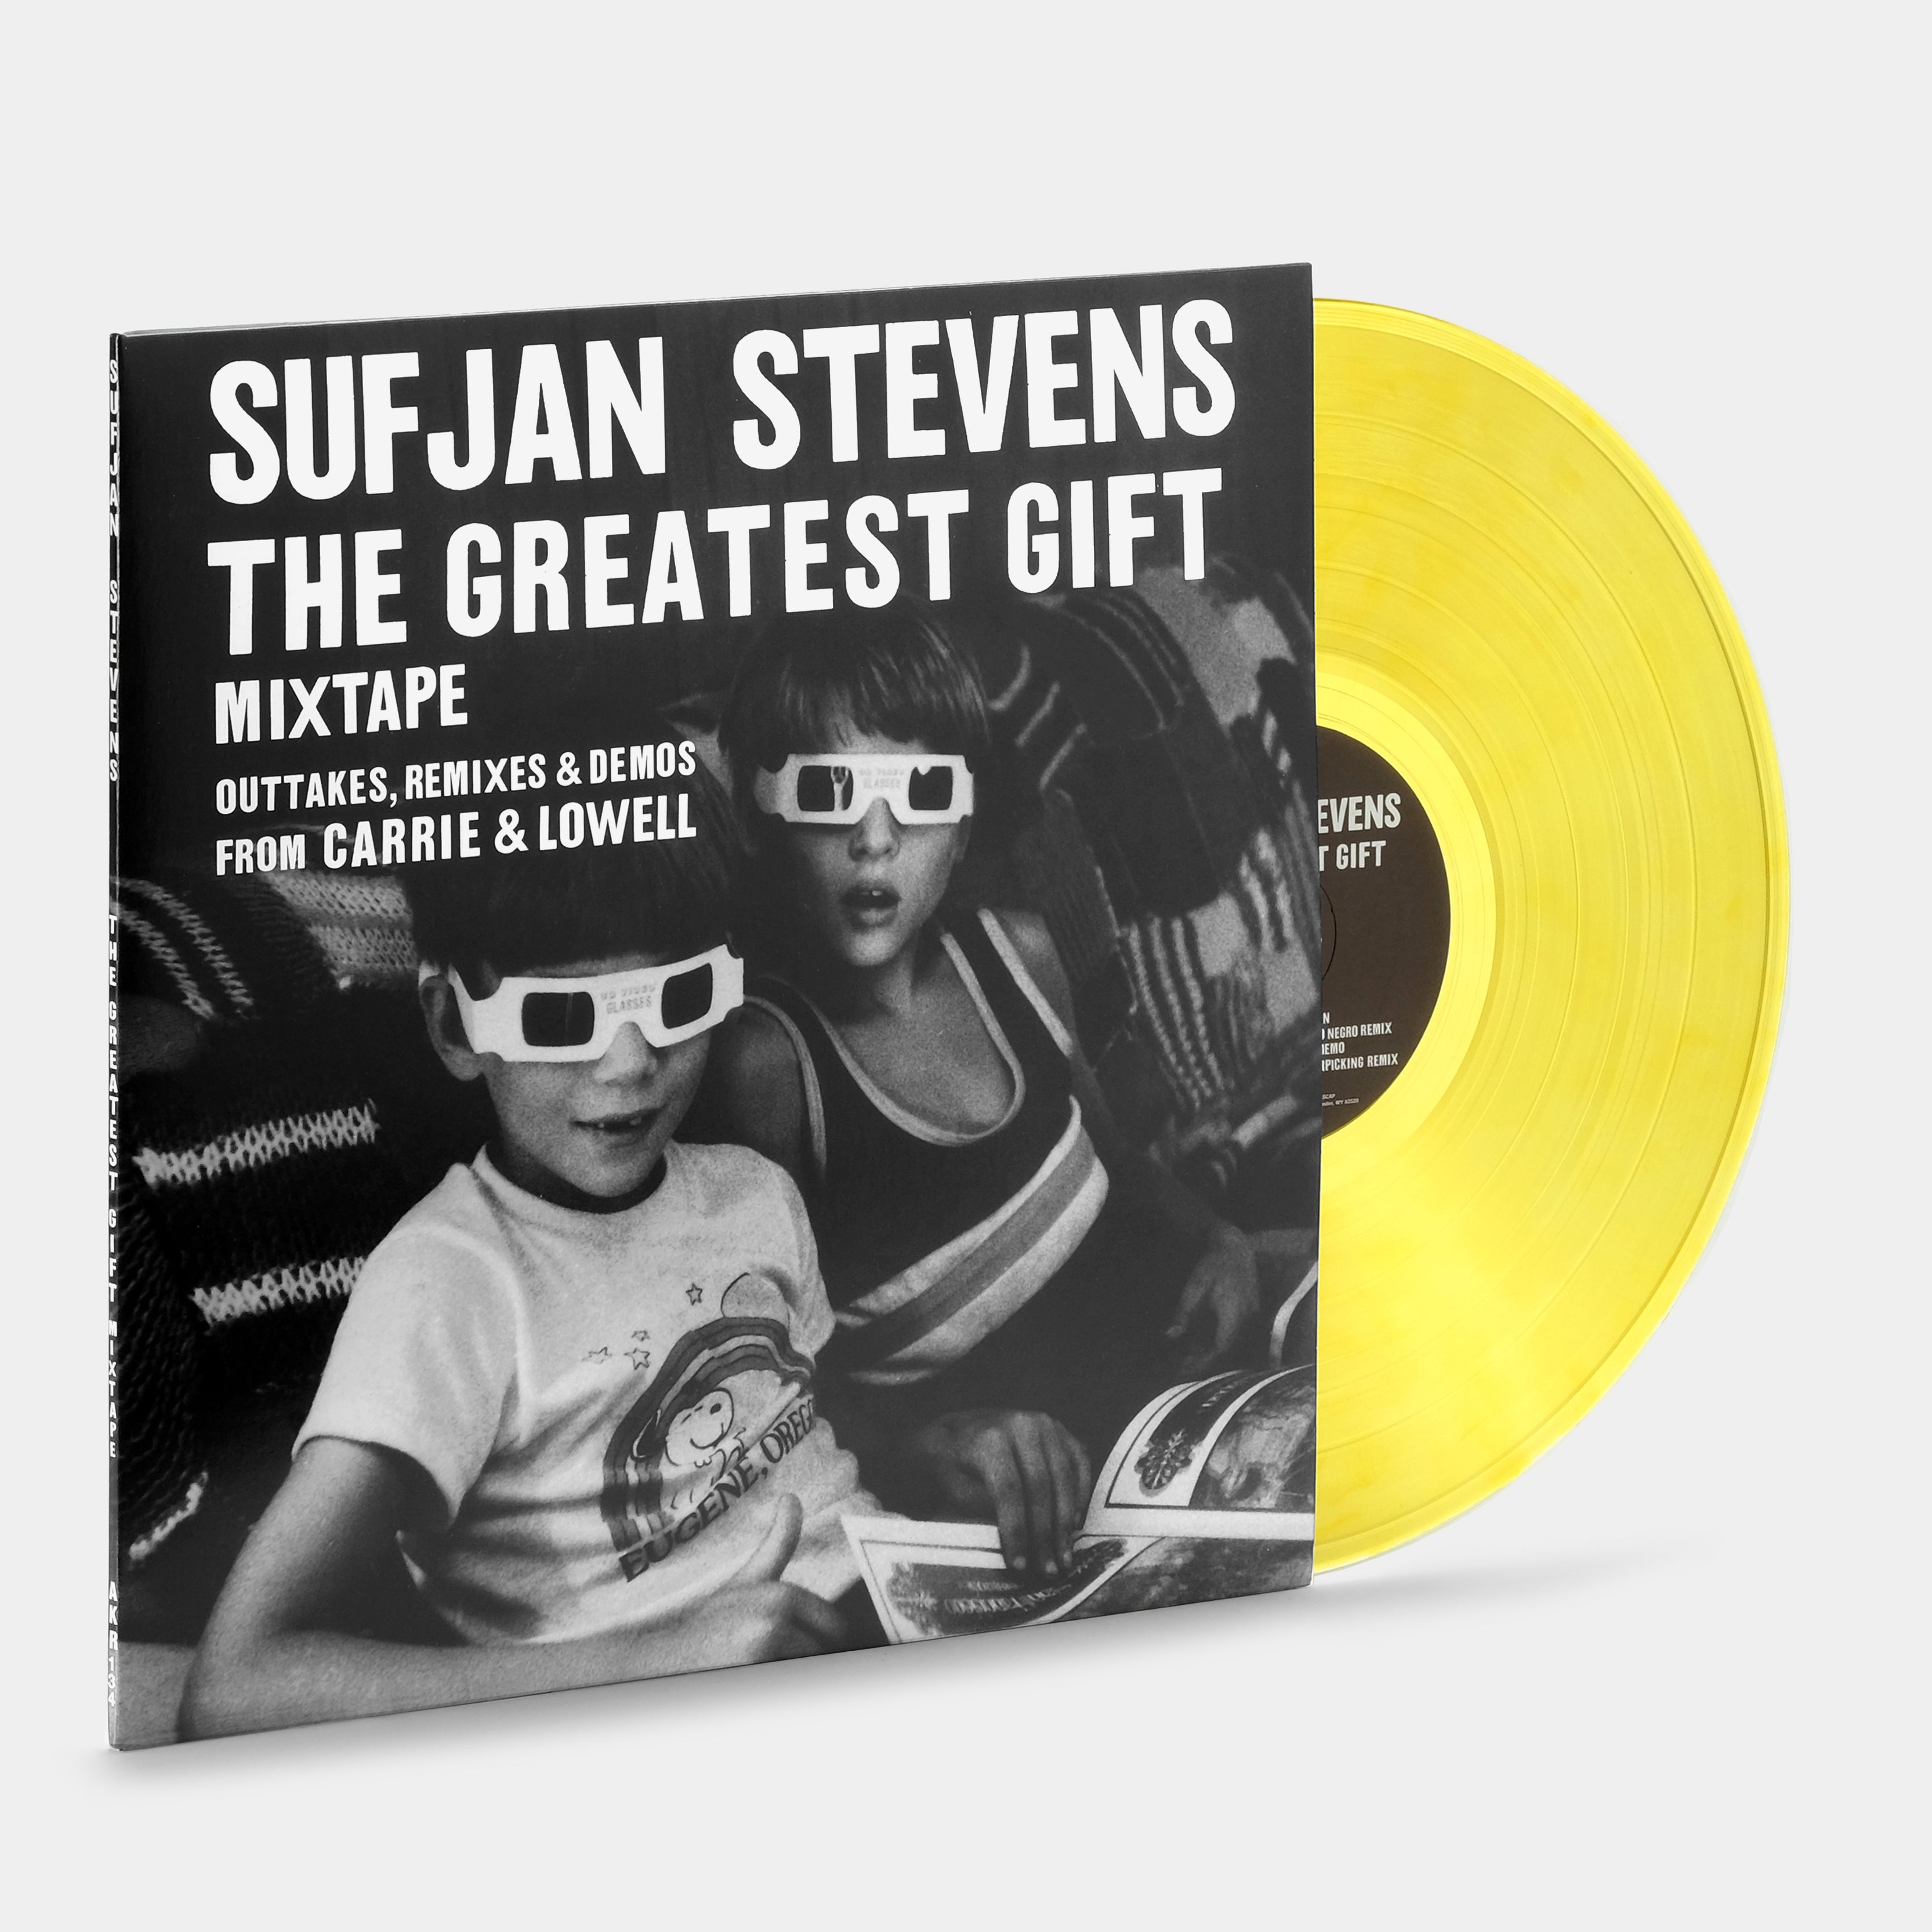 Sufjan Stevens - The Greatest Gift Mixtape (Outtakes, Remixes & Demos from Carrie & Lowell) LP Translucent Yellow Vinyl Record